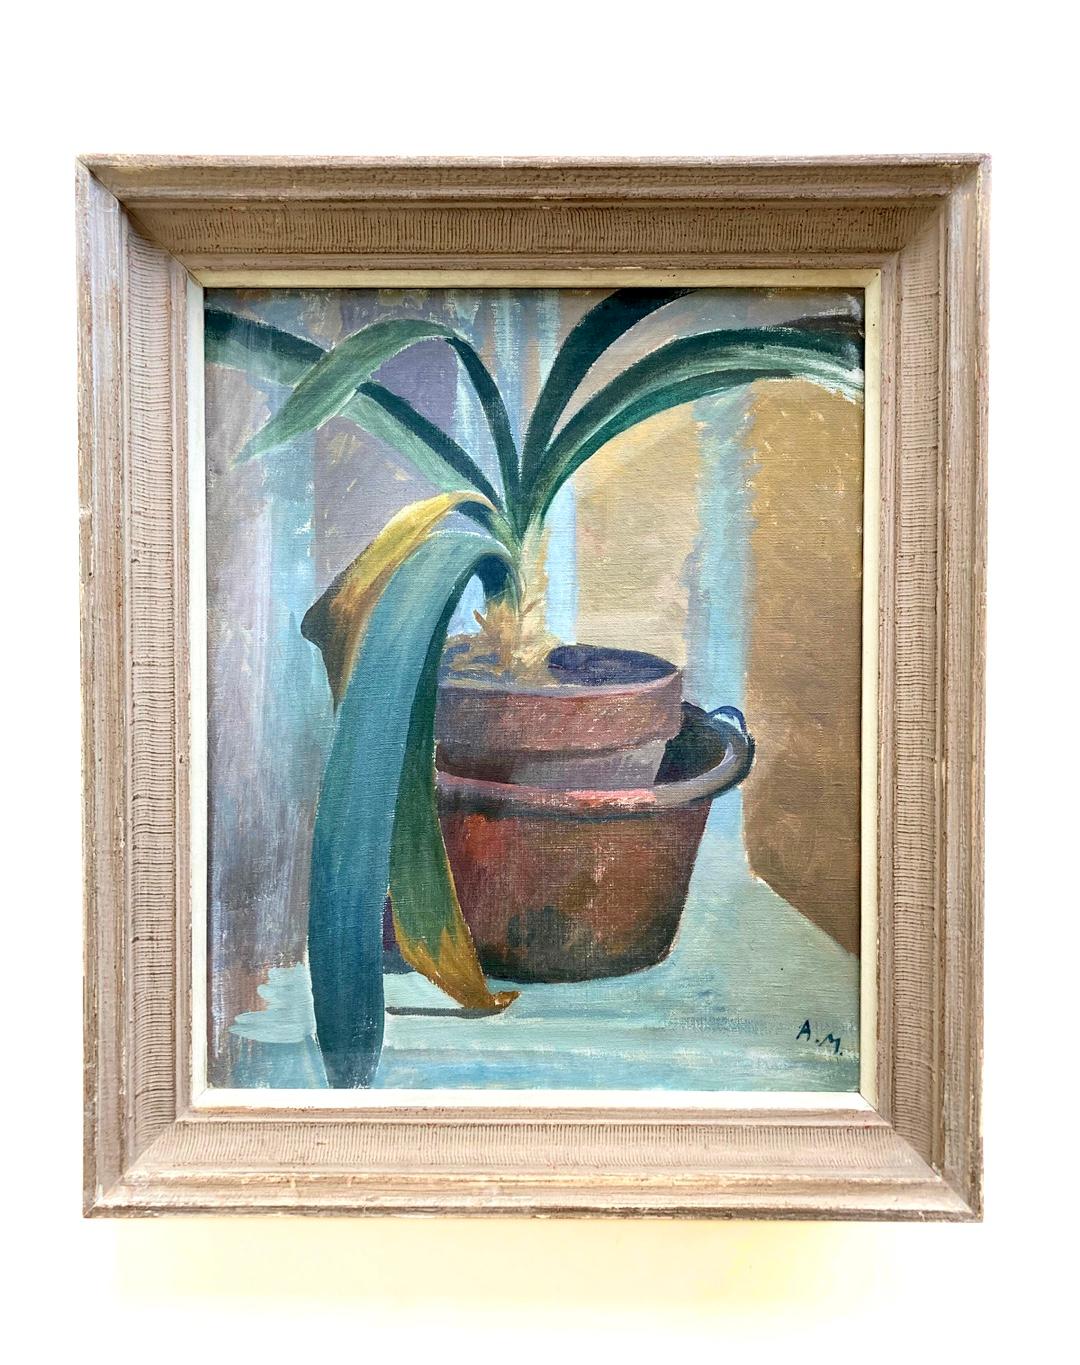 A wonderful example of a vintage, mid-century still-life: a soft, harmonious color-scheme and a natural subject that has, together with the background, been interpreted in a graphic style. A calm yet interesting piece of original art that will